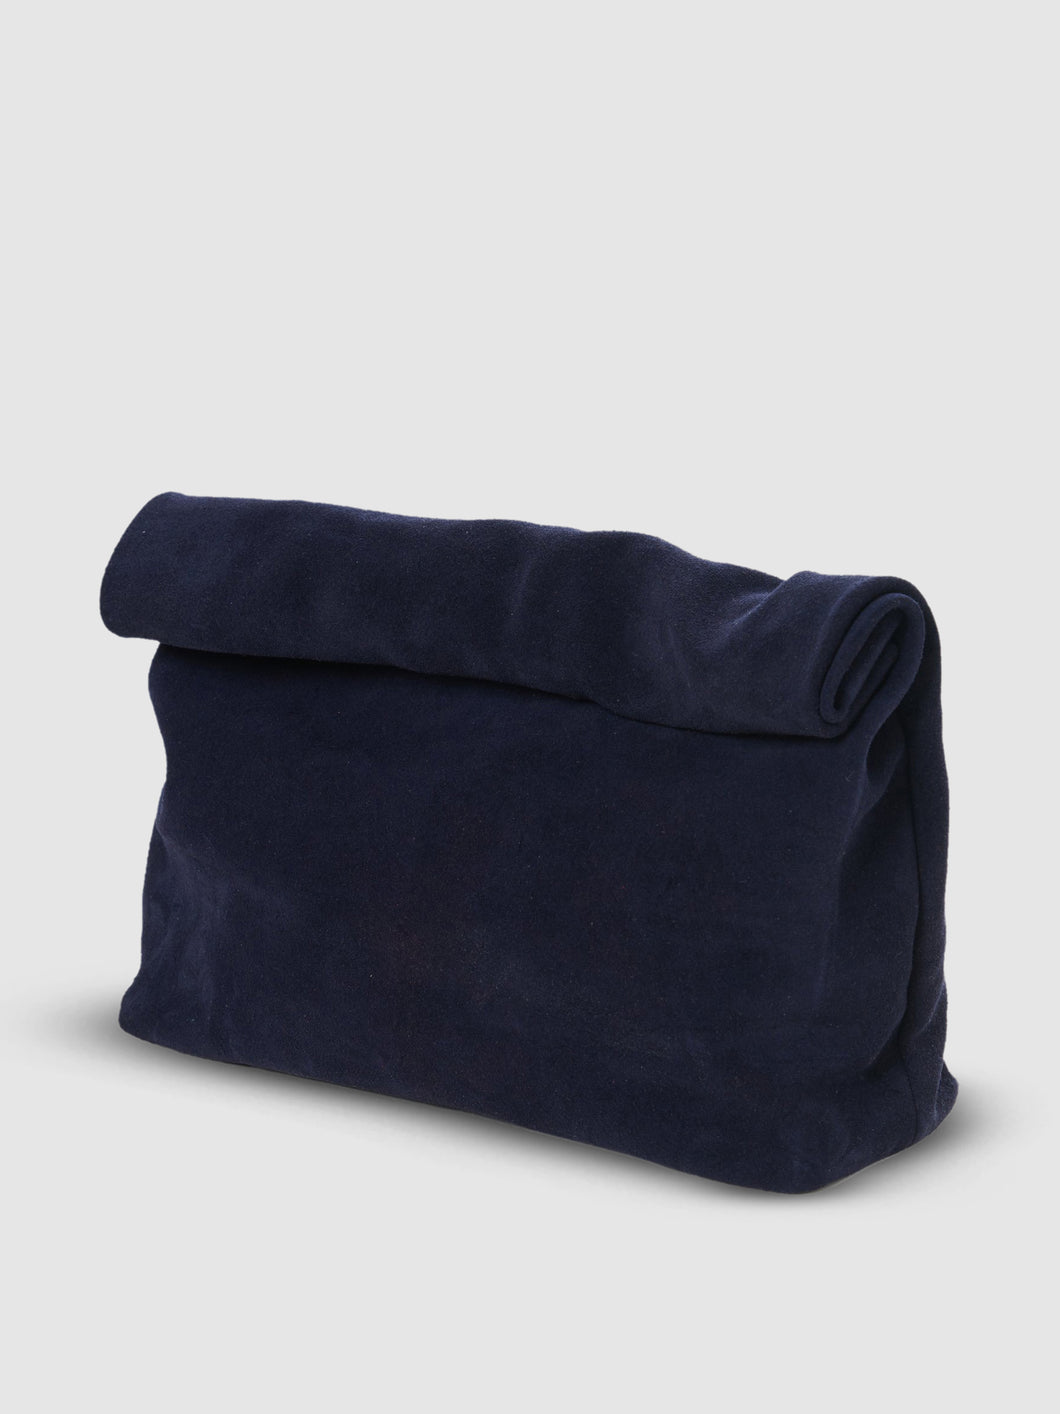 The Lunch - Navy Suede